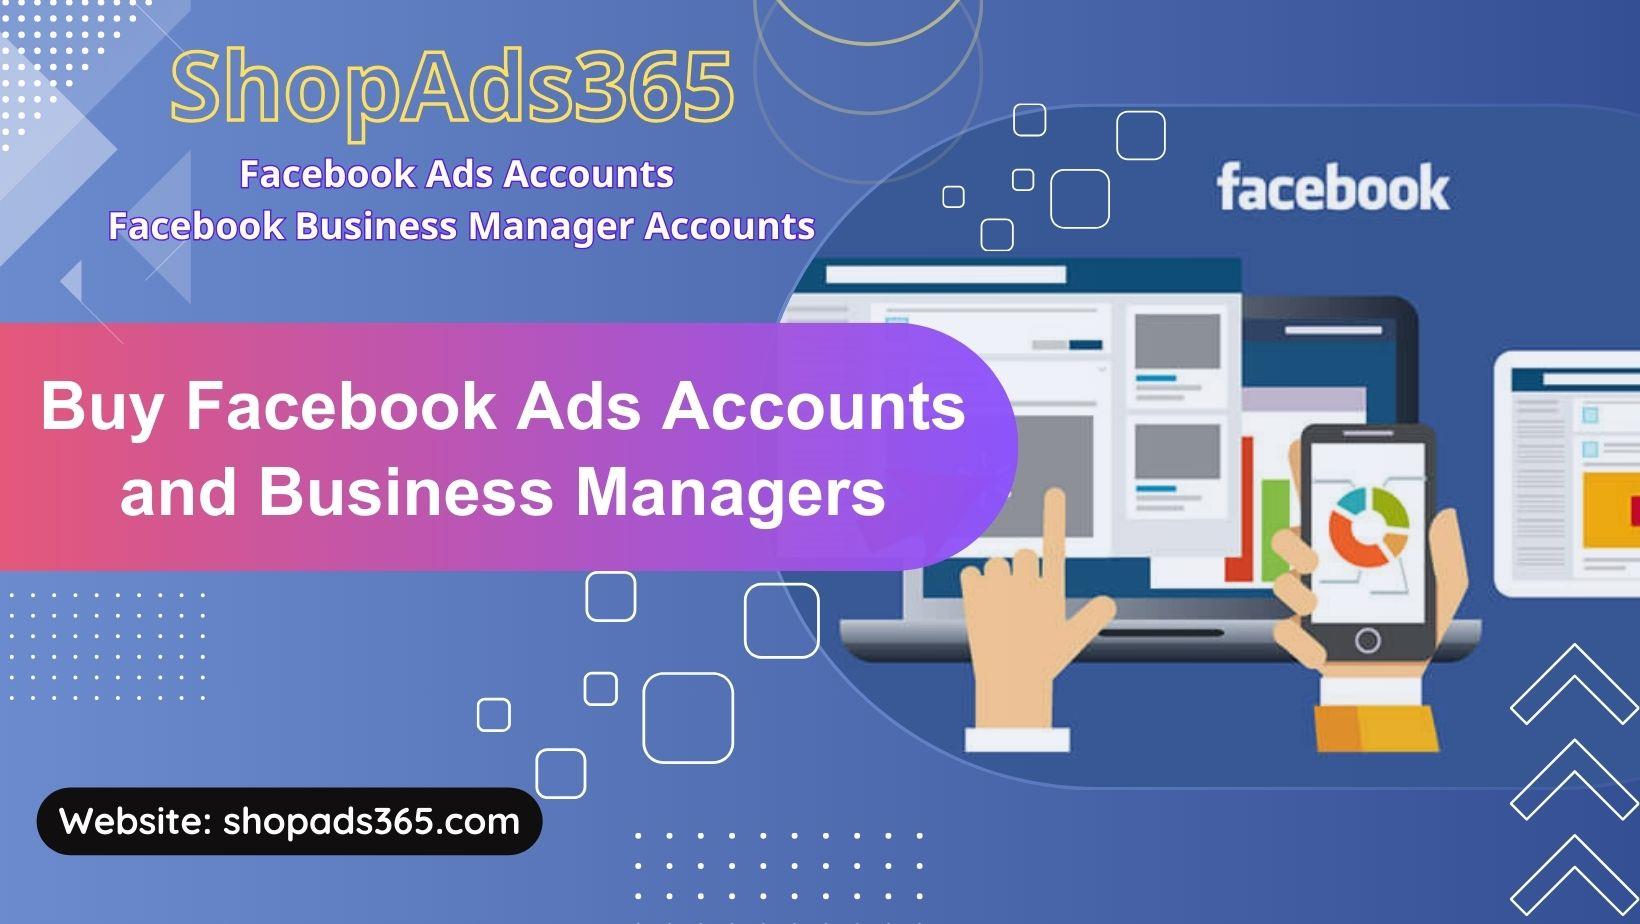 Buy Facebook Ads Accounts and Business Managers